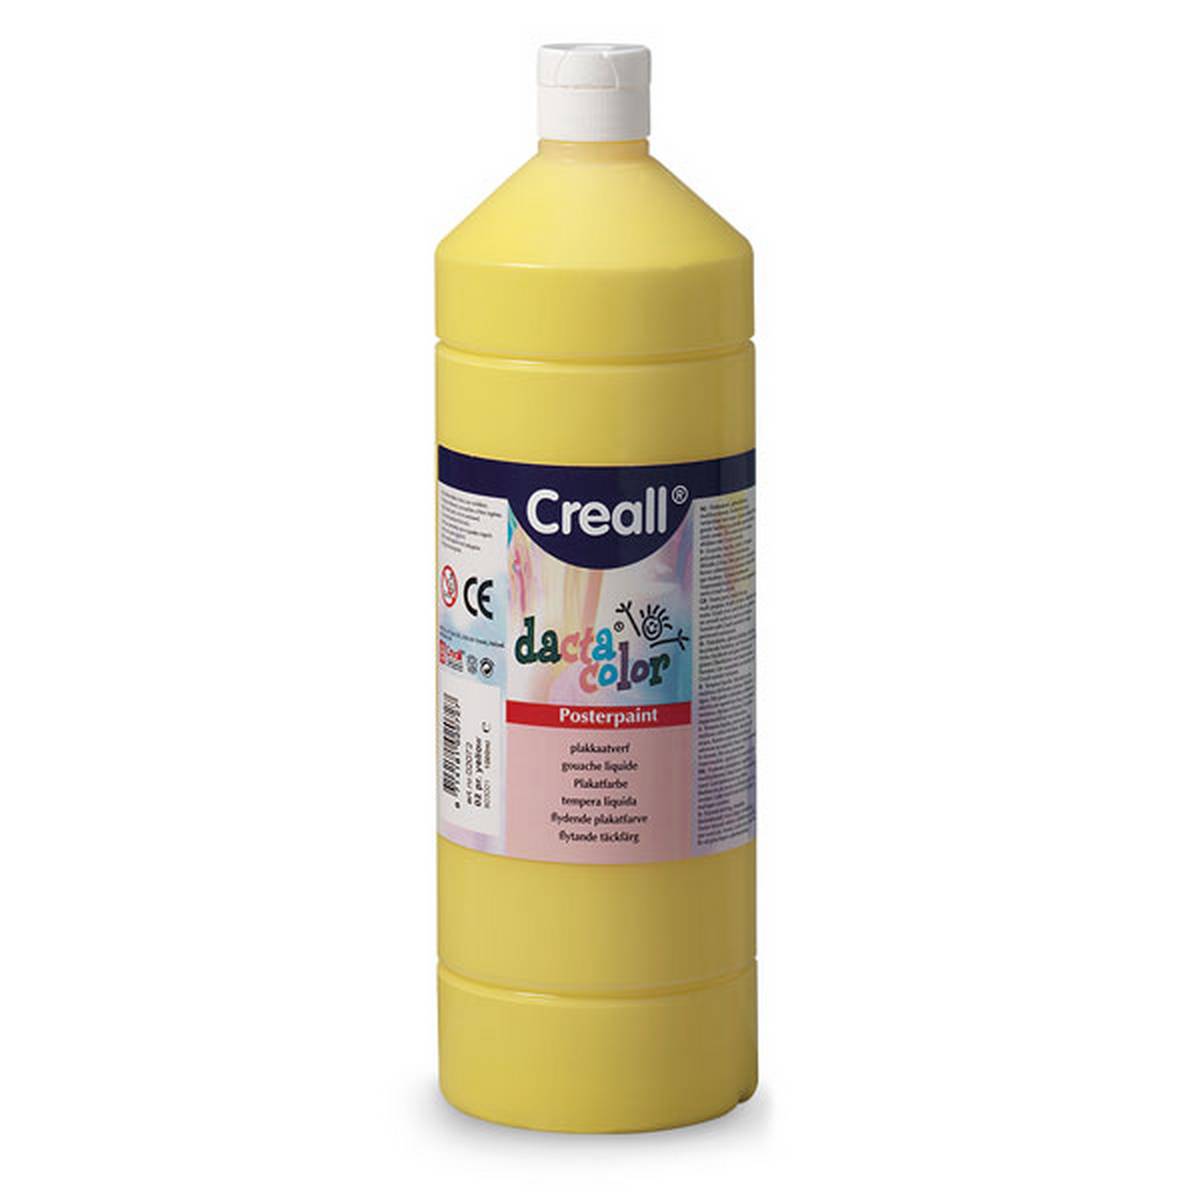 Creall 1 litre Bottle Poster Paint - Primary Yellow